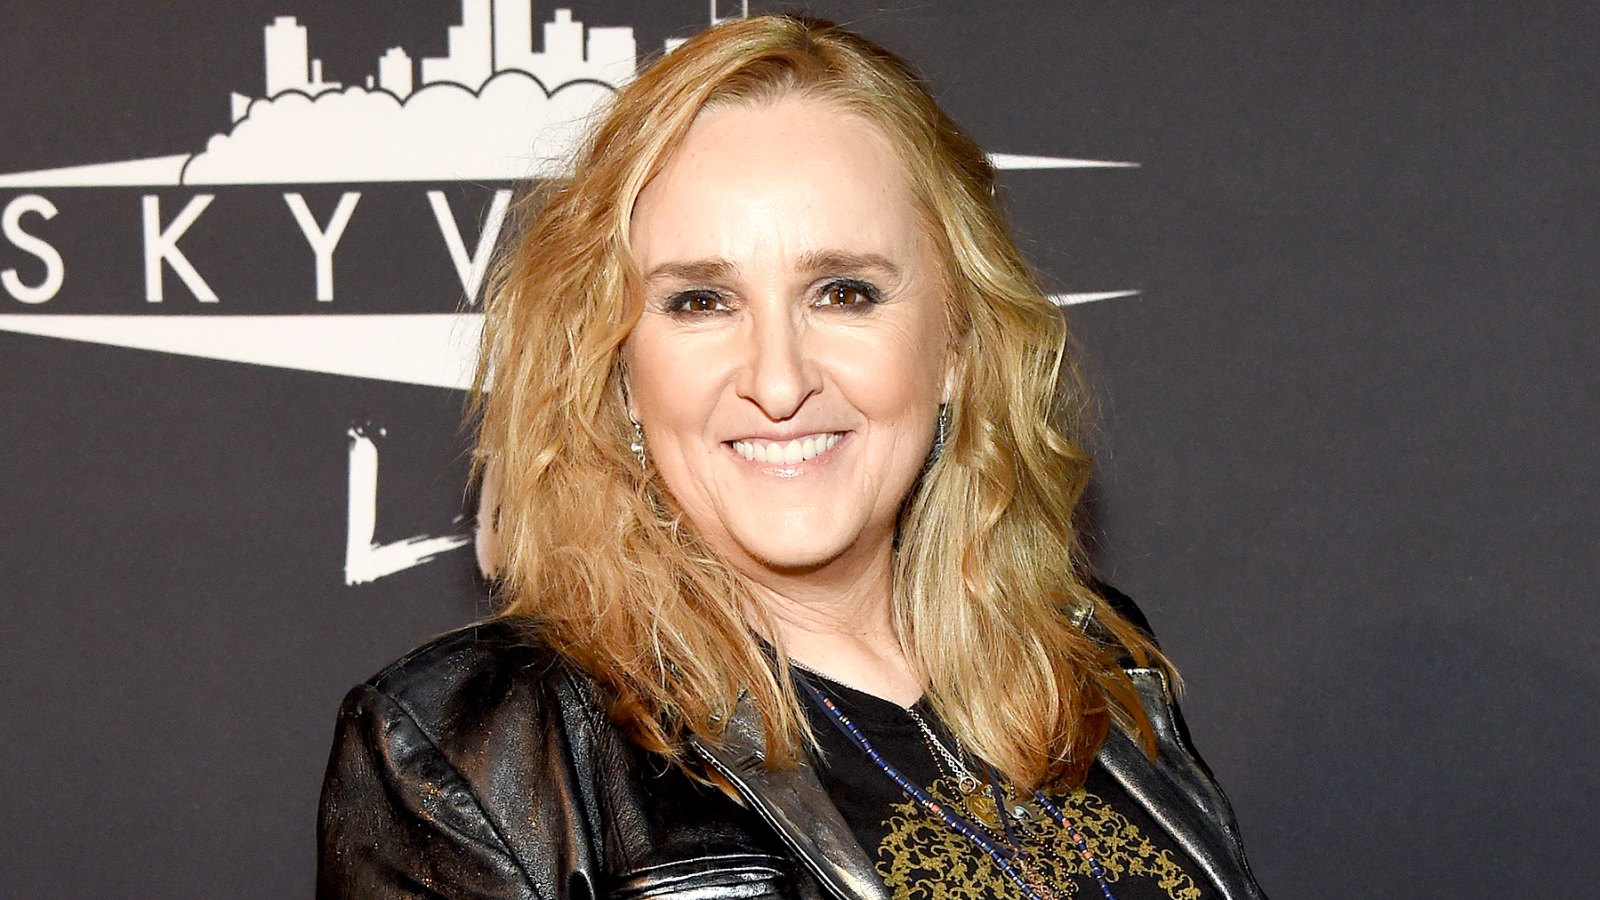 Melissa Etheridge attends a special Woman's March Show at Skyville Live on March 20, 2017 in Nashville, Tennessee.